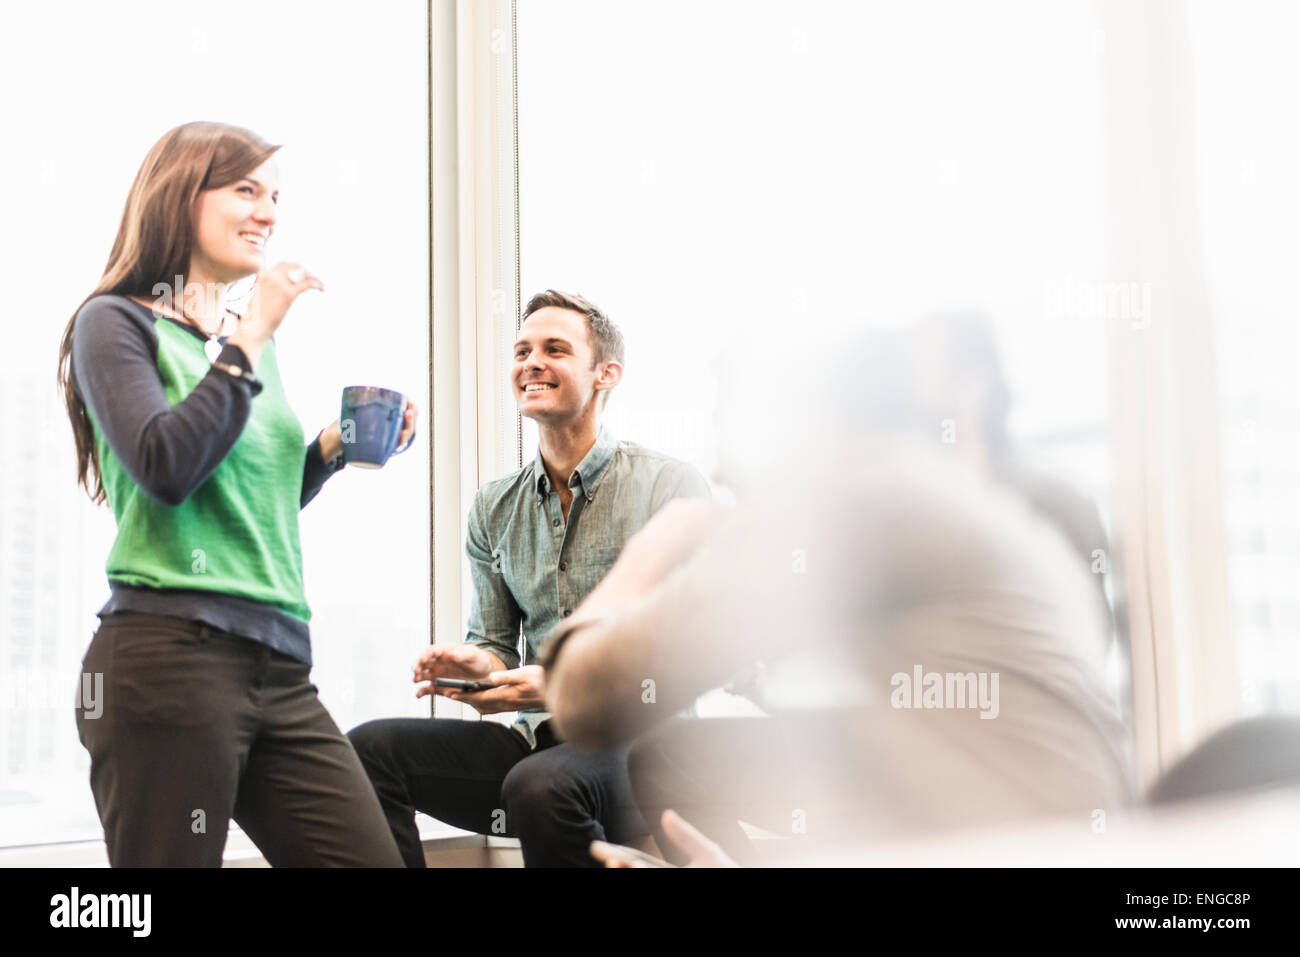 2 People Having A Conversation High Resolution Stock Photography and Images  - Alamy